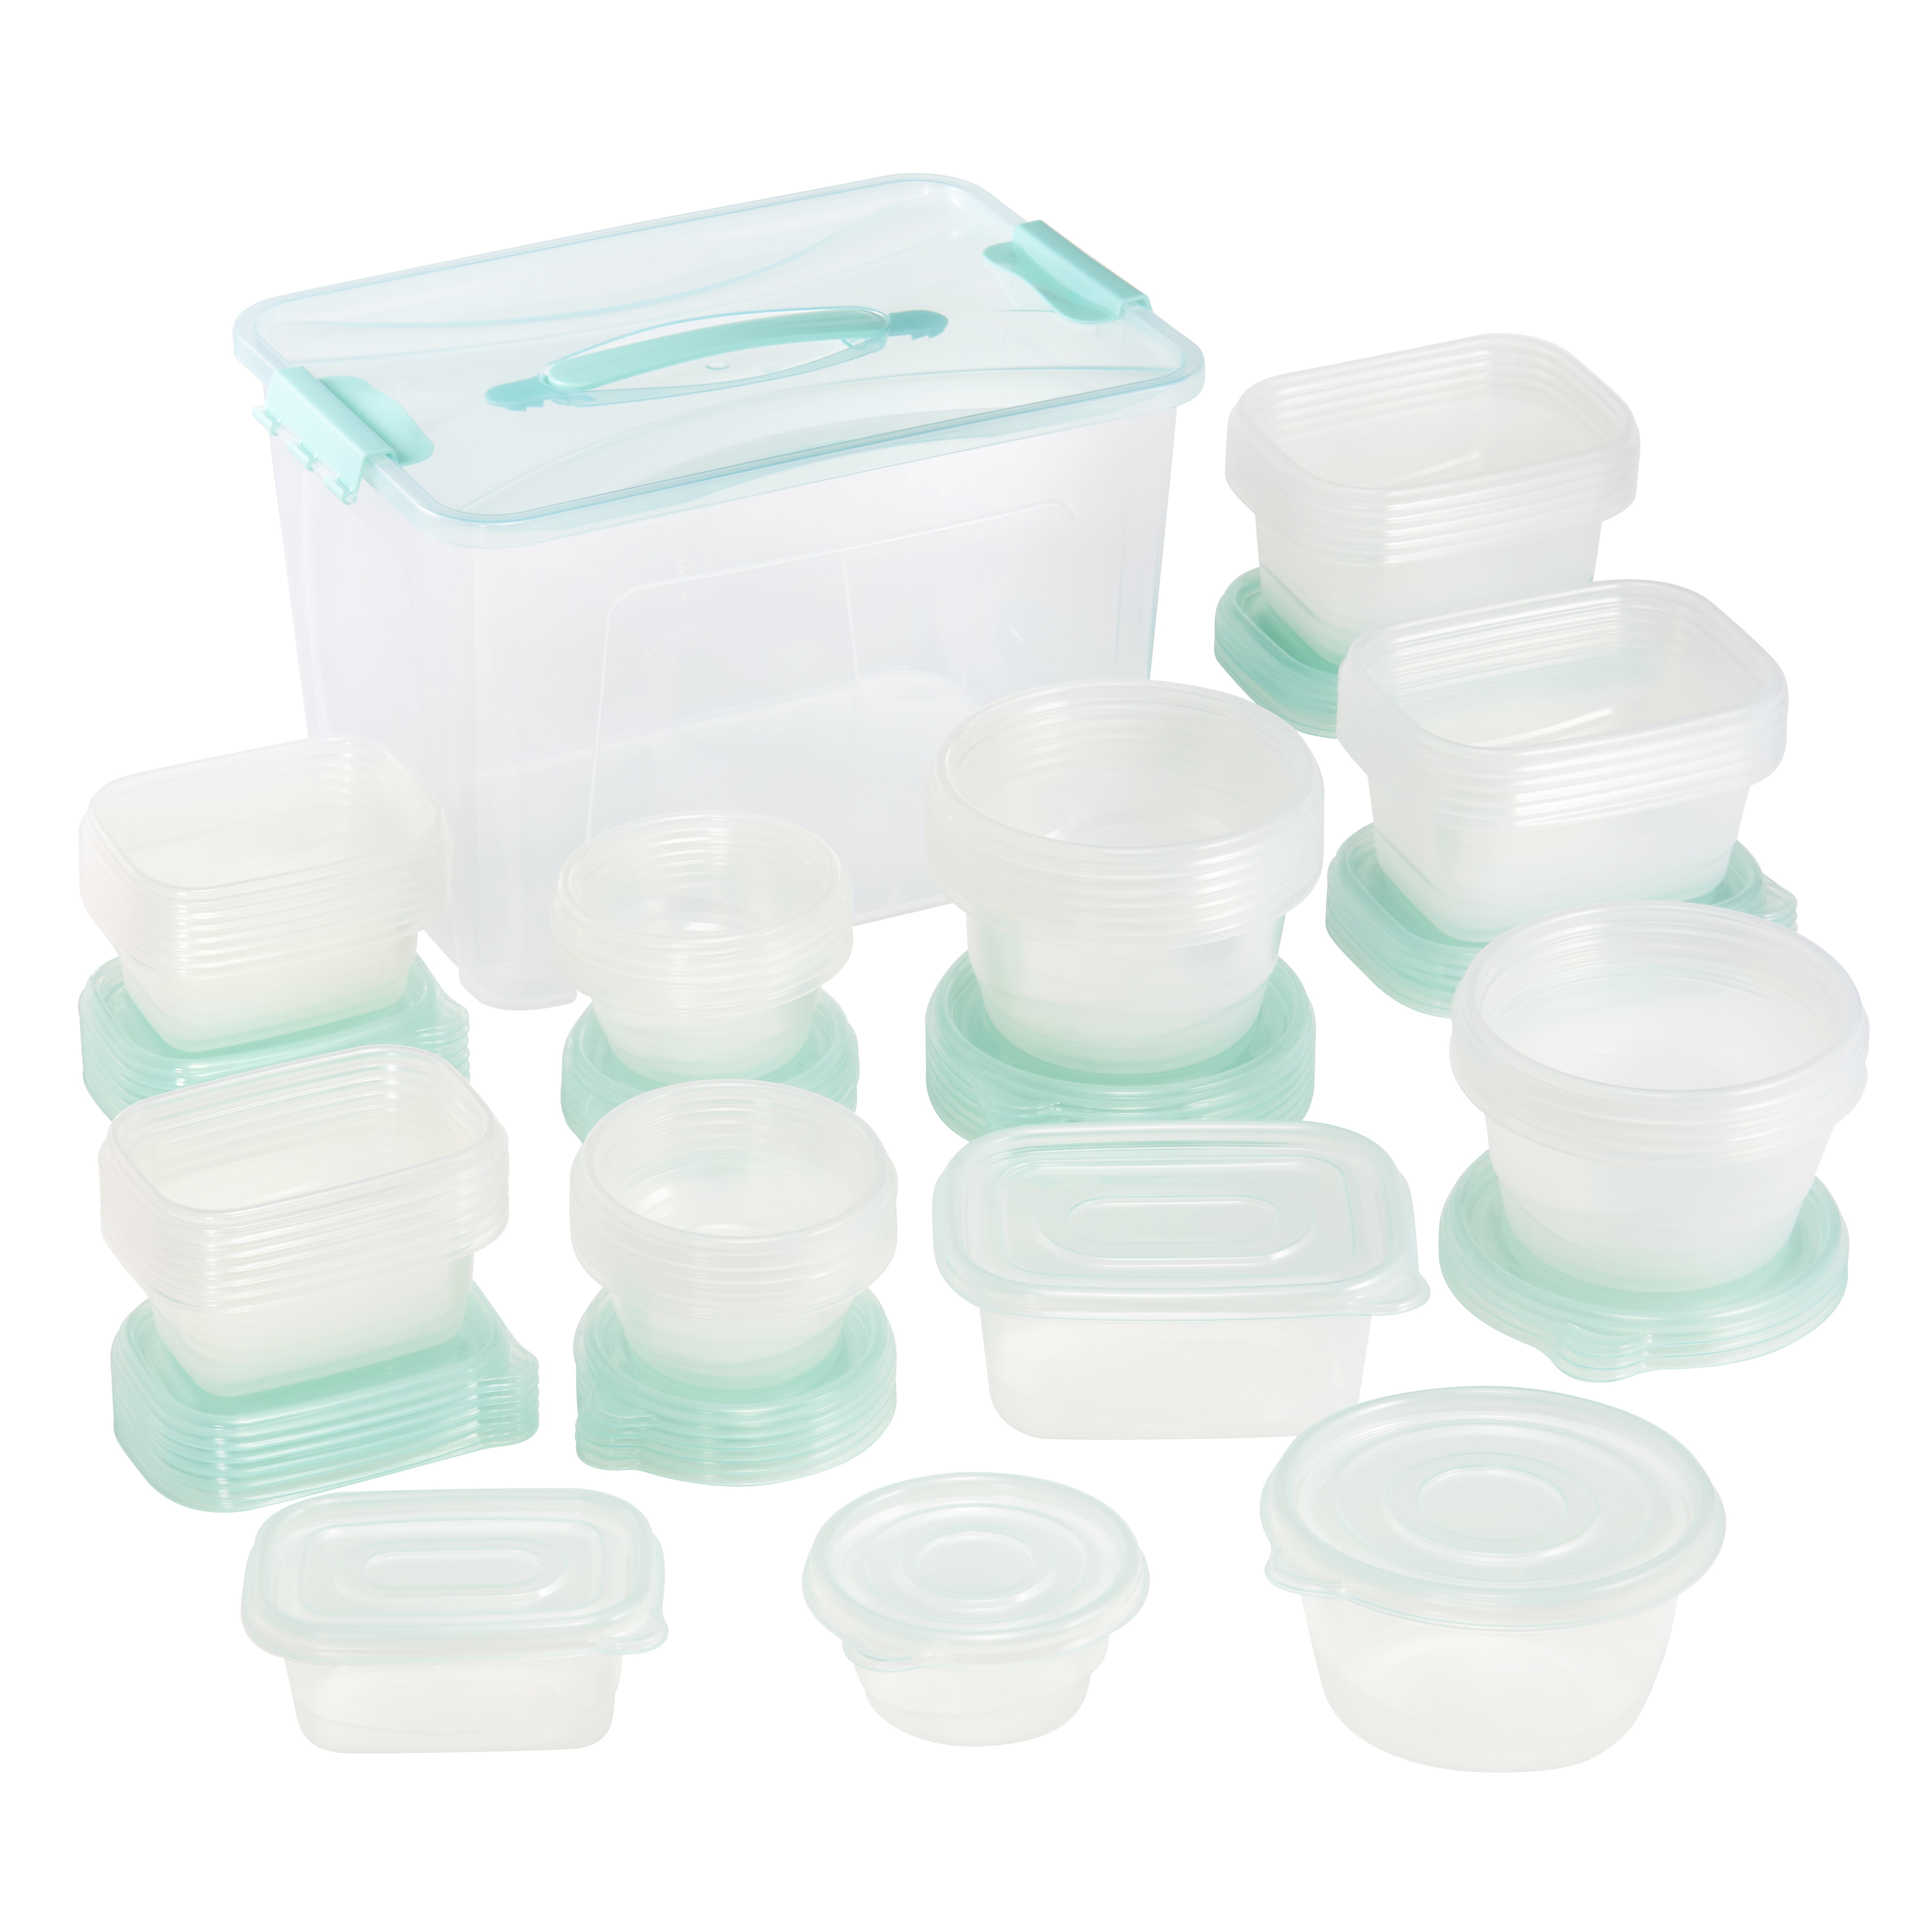 KEY Rectangle set Multisize BPA-Free Food Storage Container at